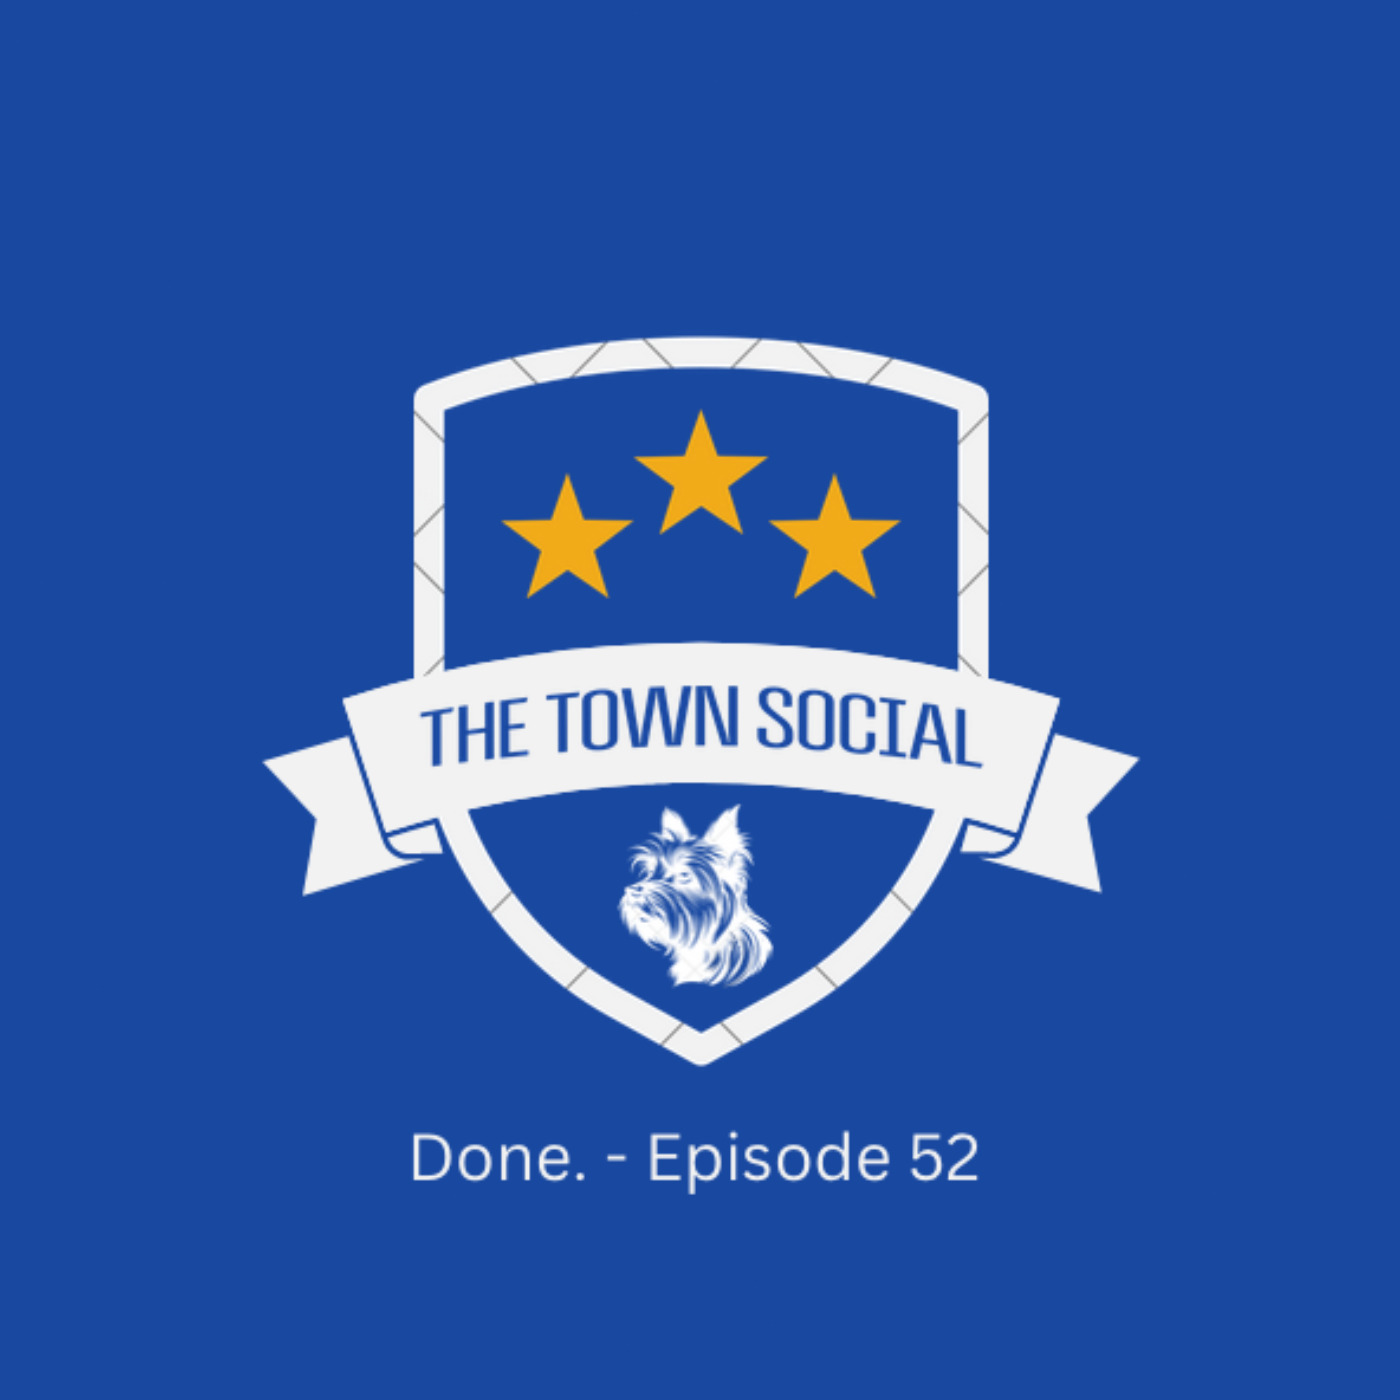 Done. The Huddersfield Town Social - Episode 52.